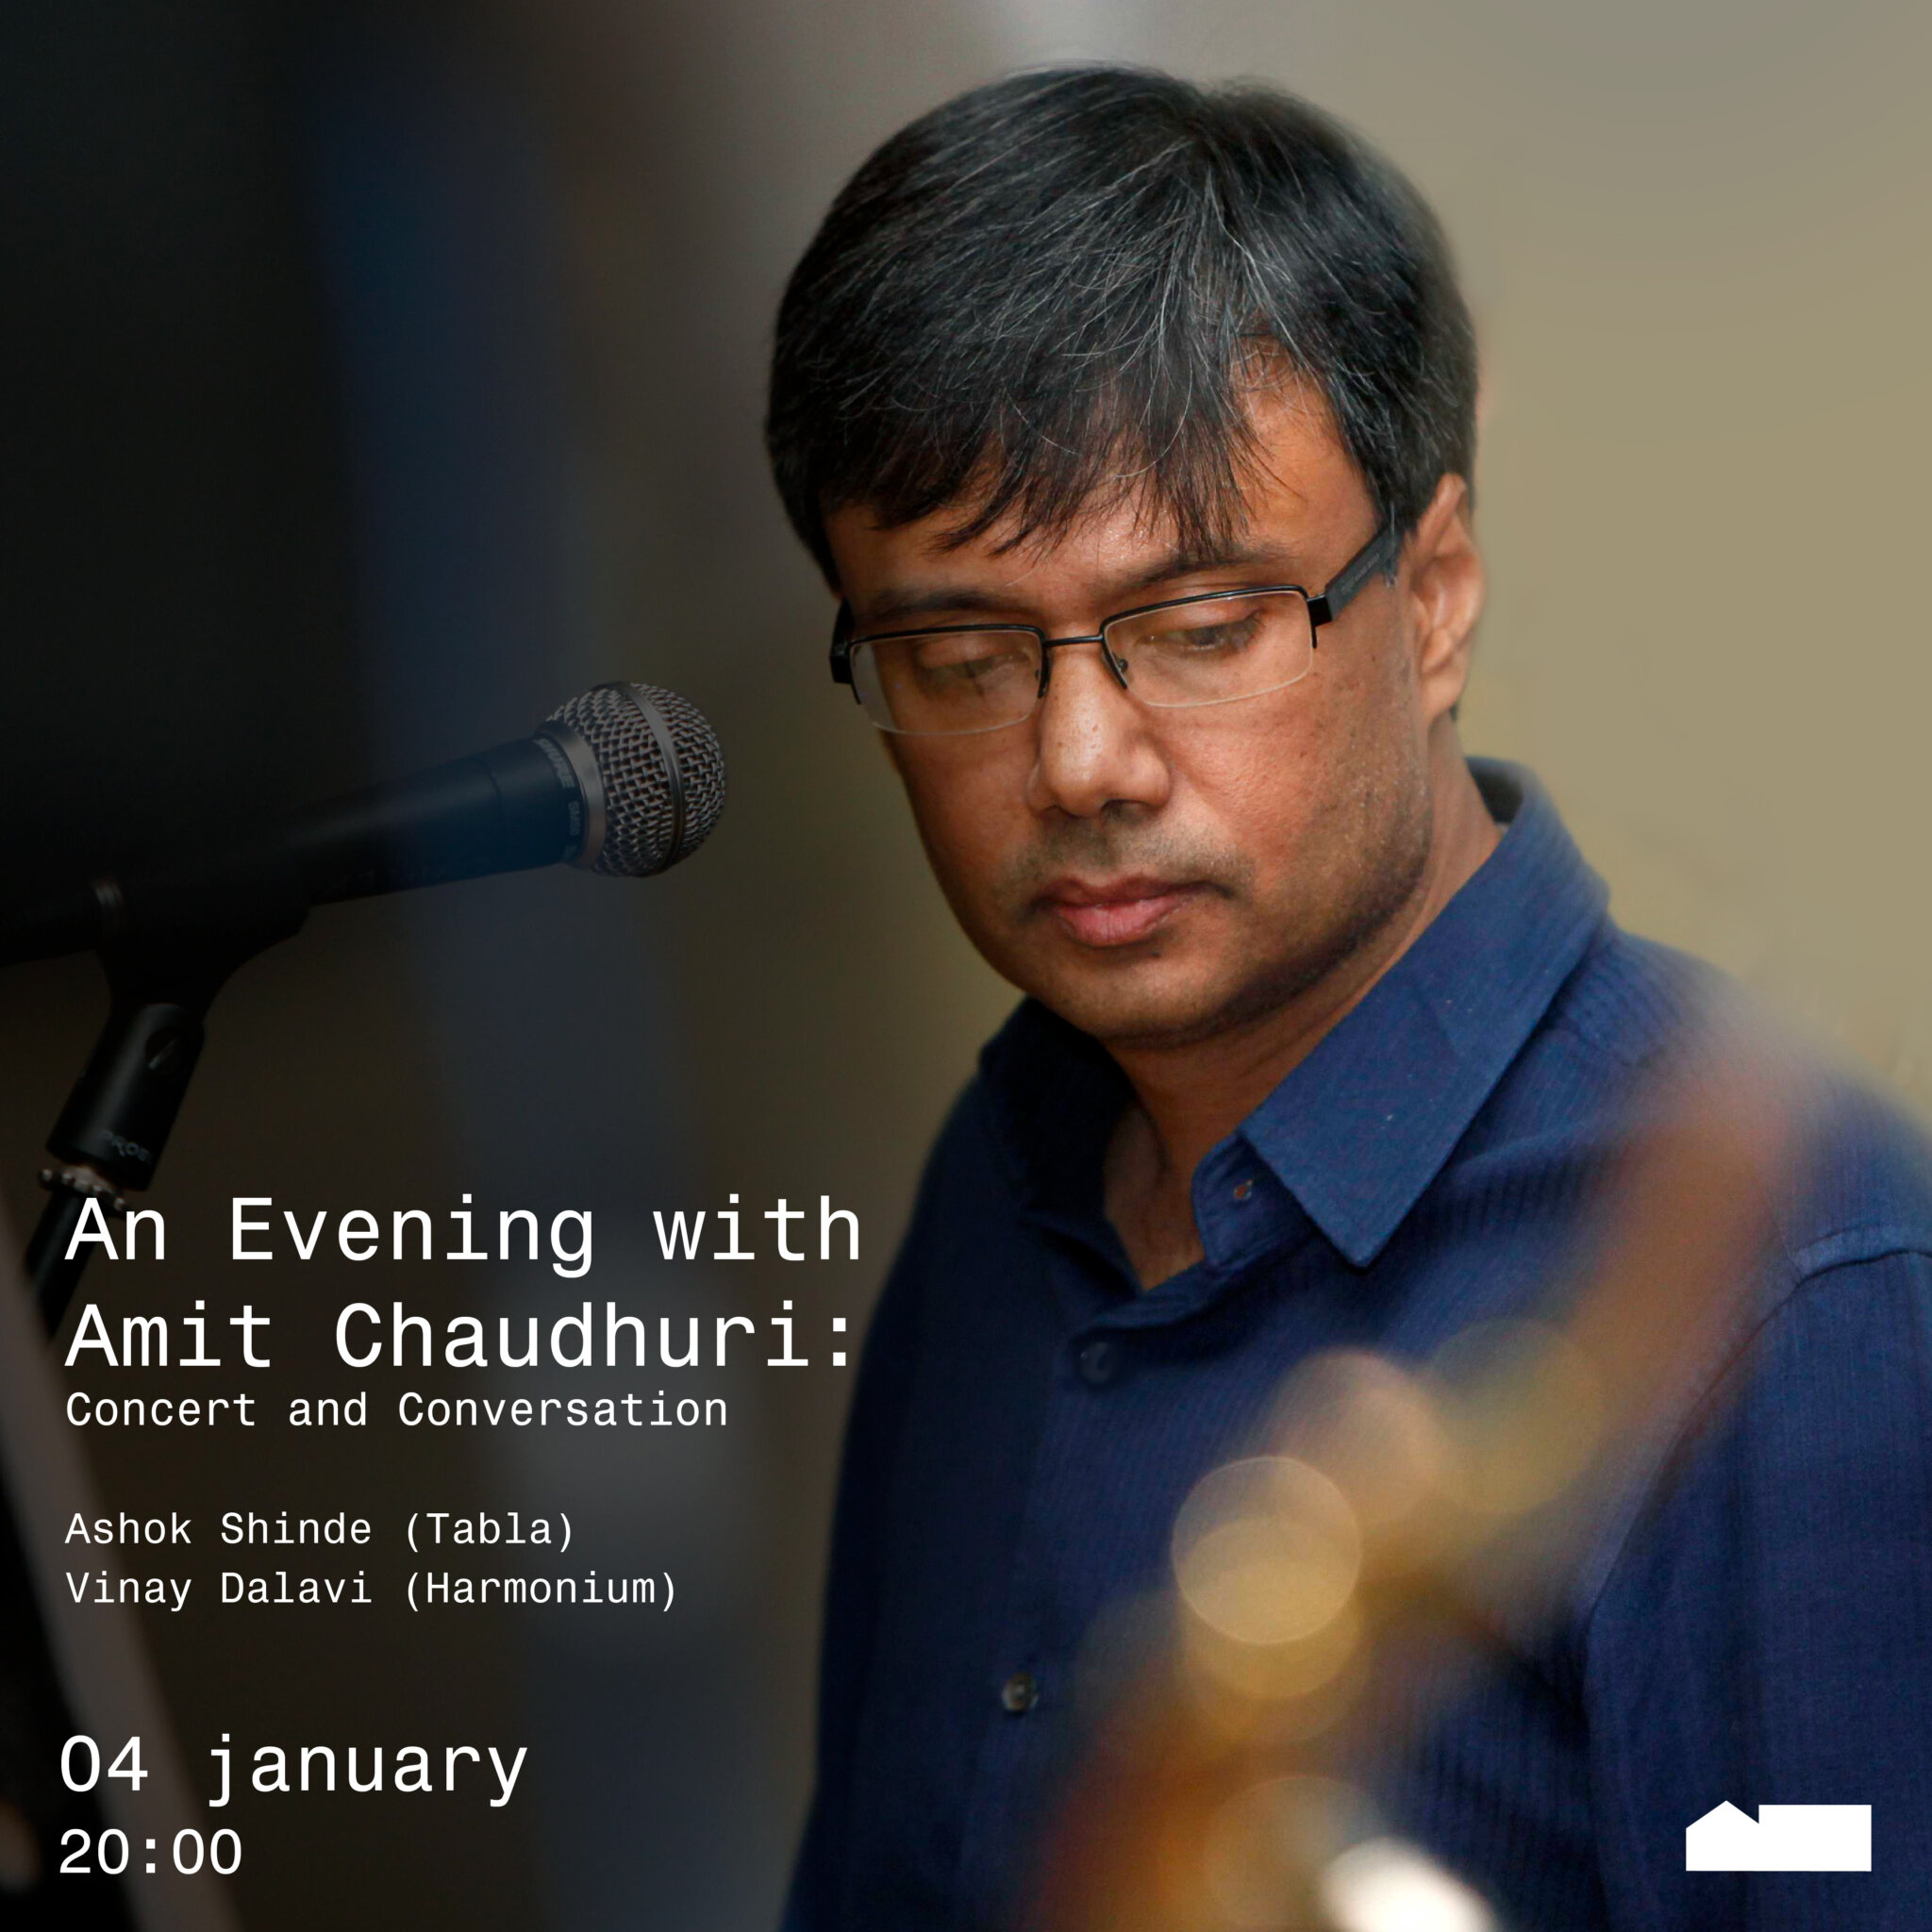 An evening with Amit Chaudhuri: Concert and Conversation